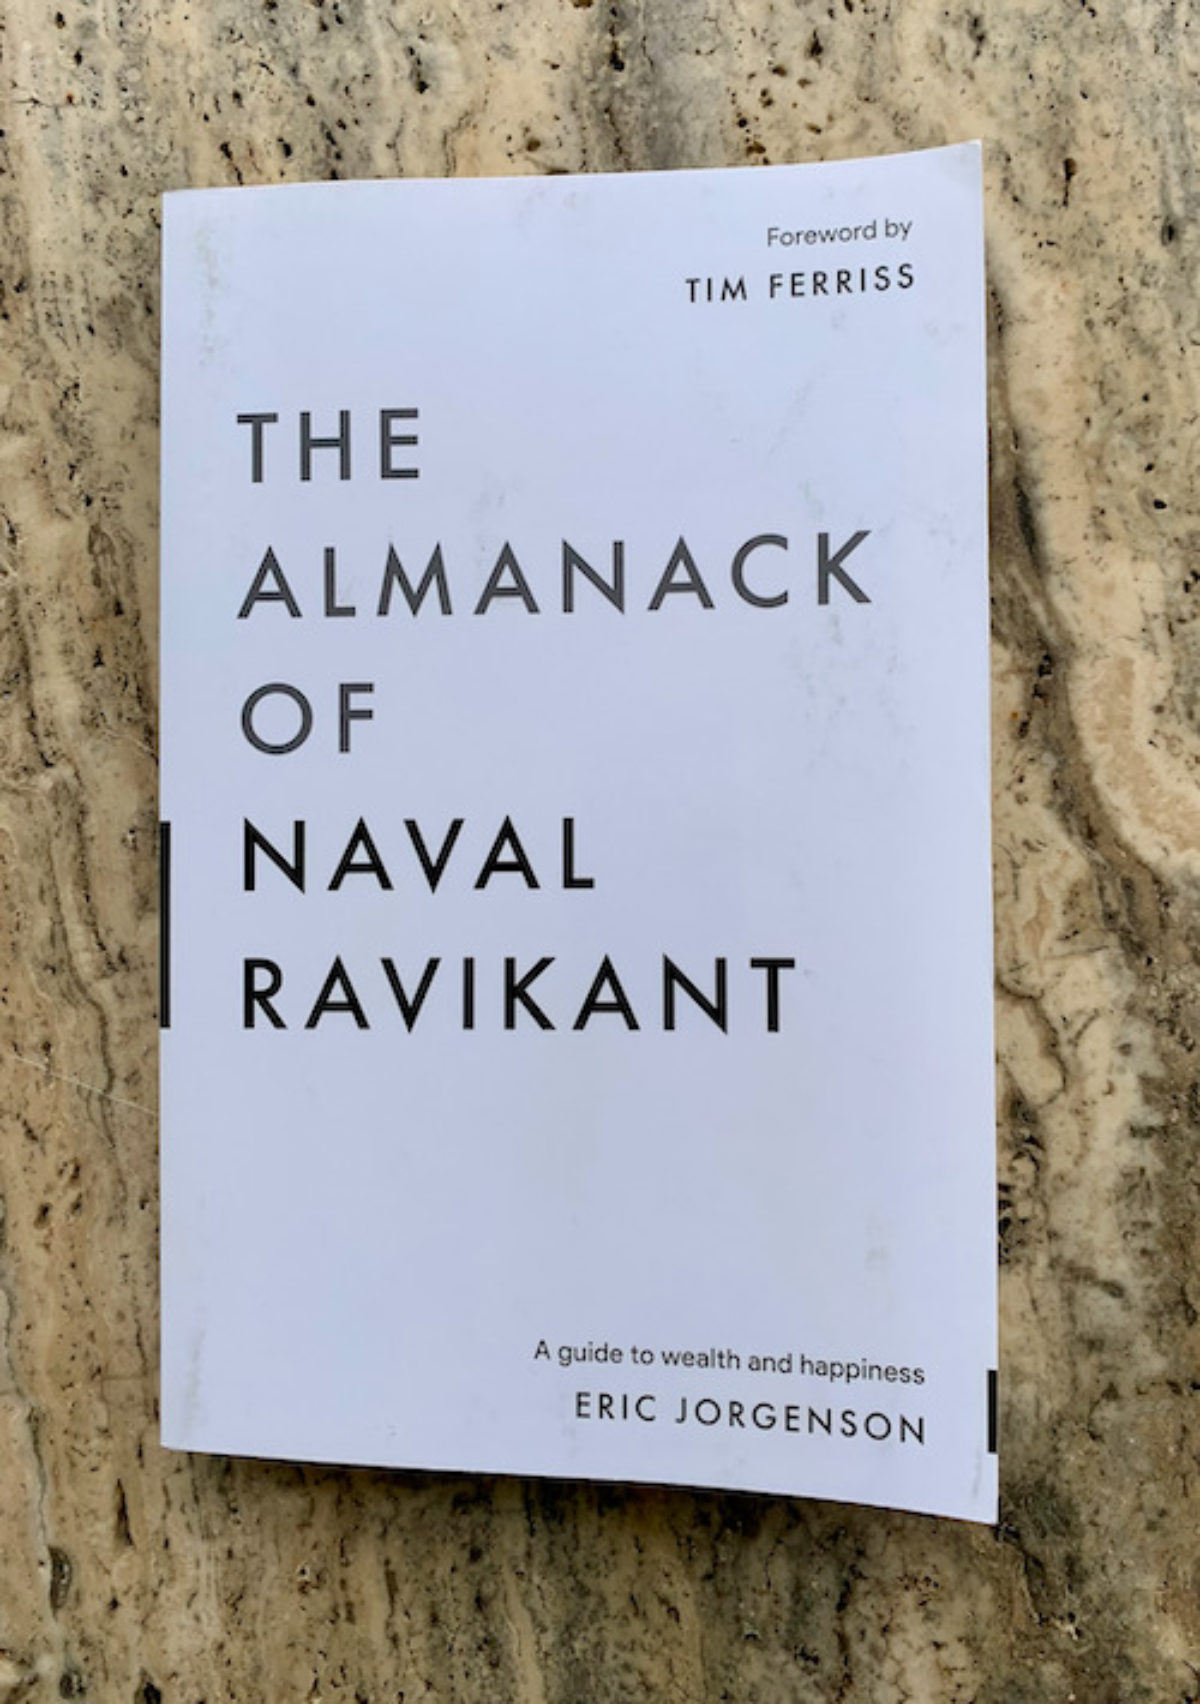 The Almanack of Naval Ravikant: Buy The Book Now!